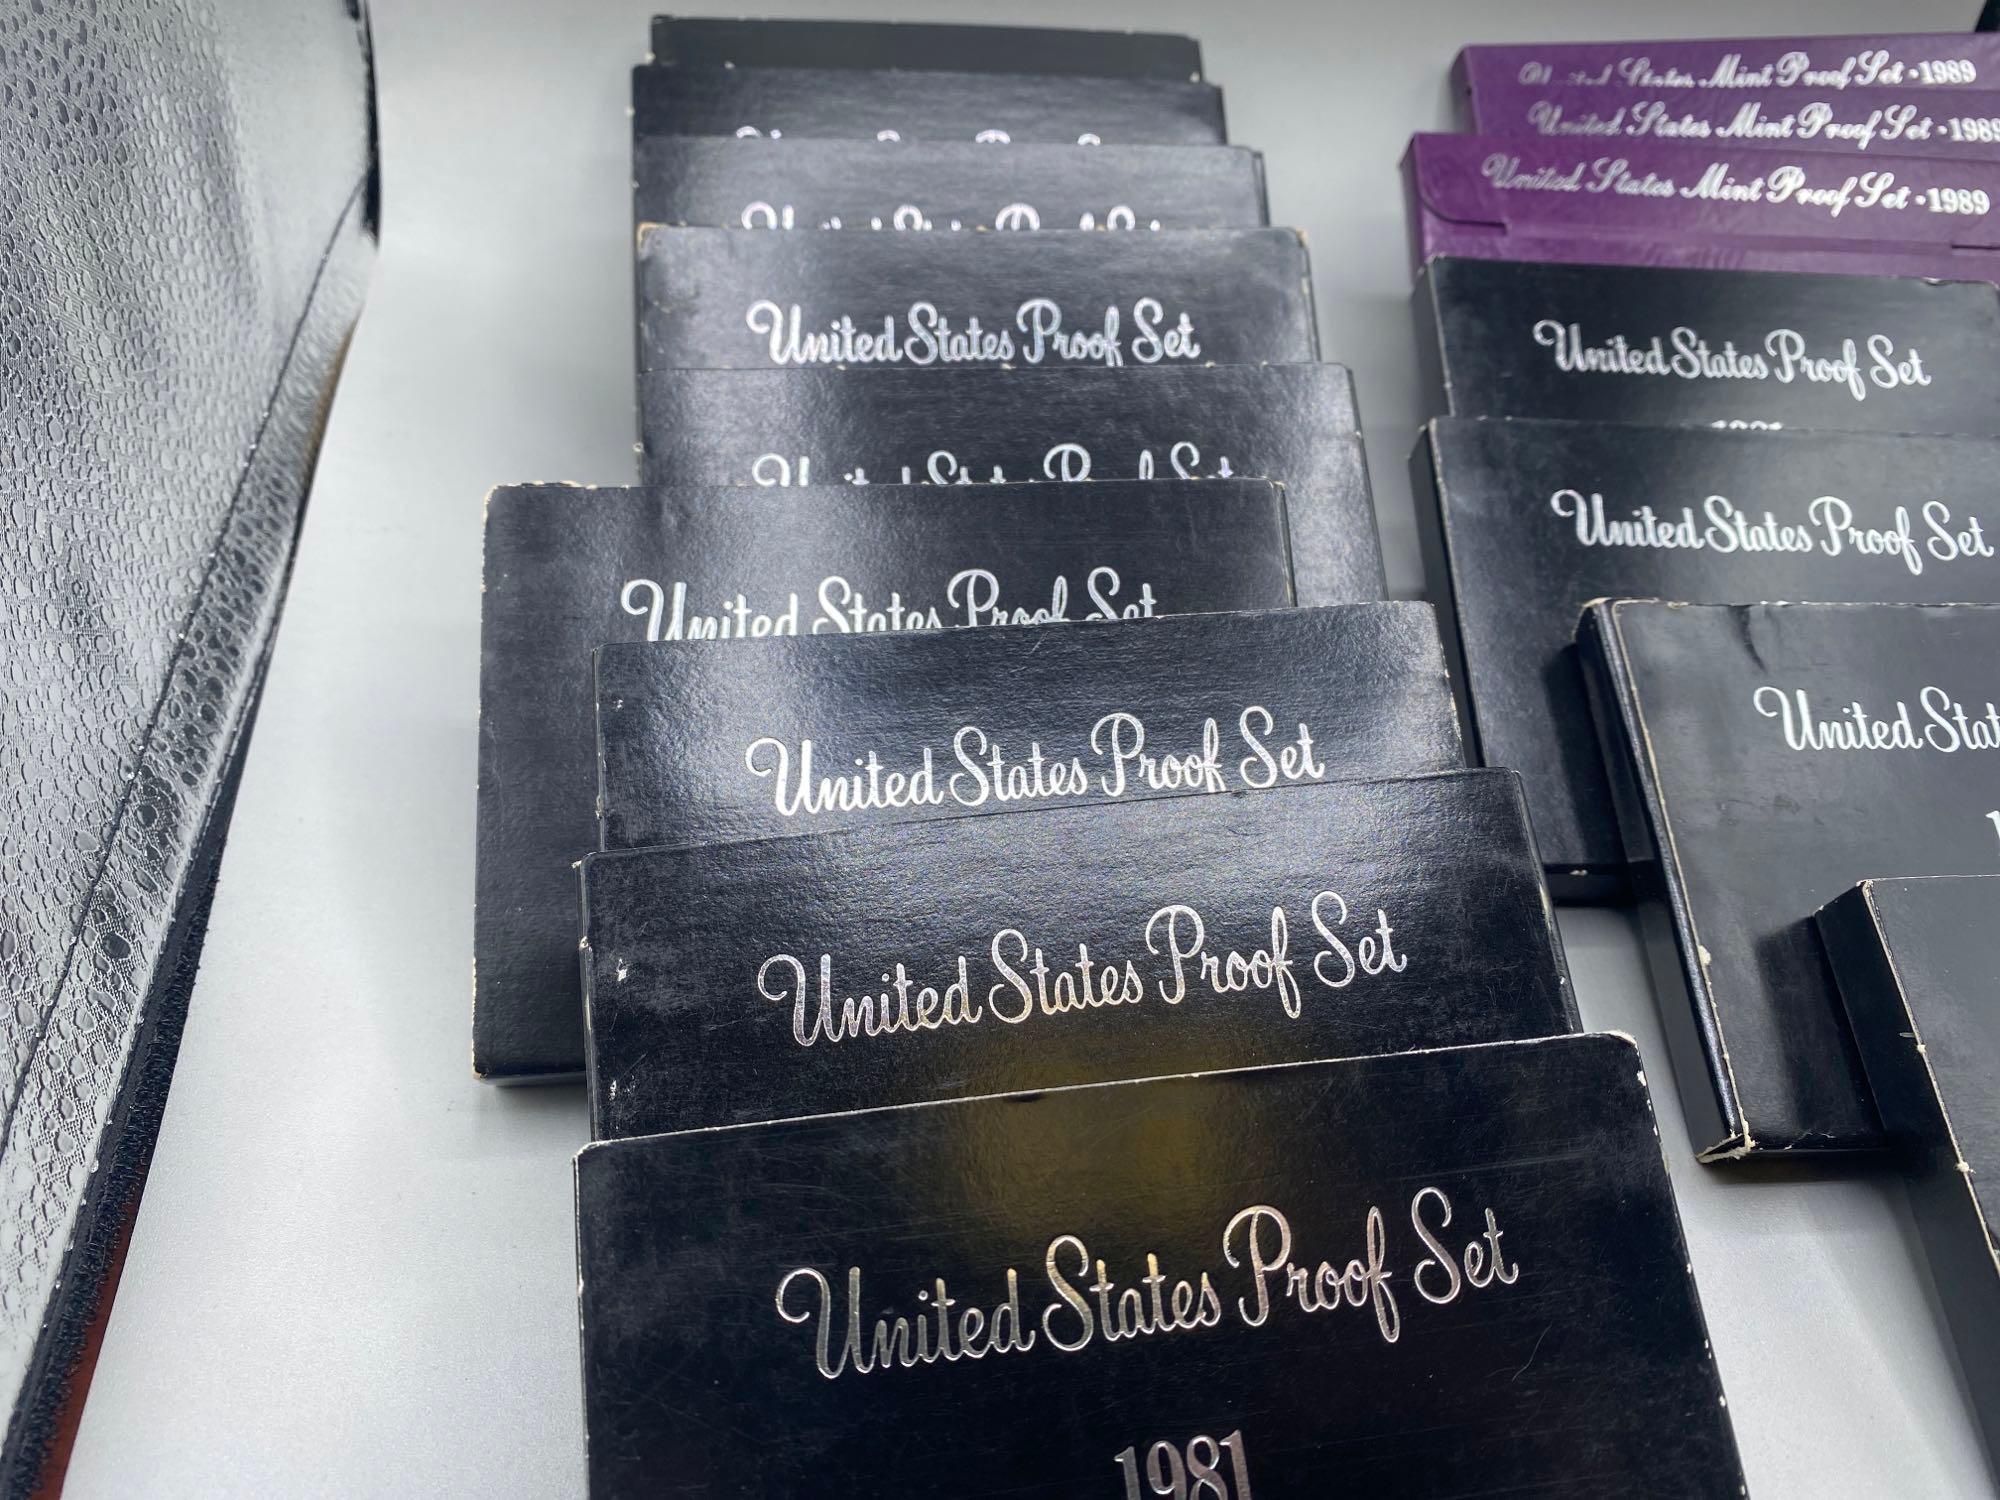 U.S. Proof Sets 1971 to 1992 multiples of some years and missing other years (48 total)